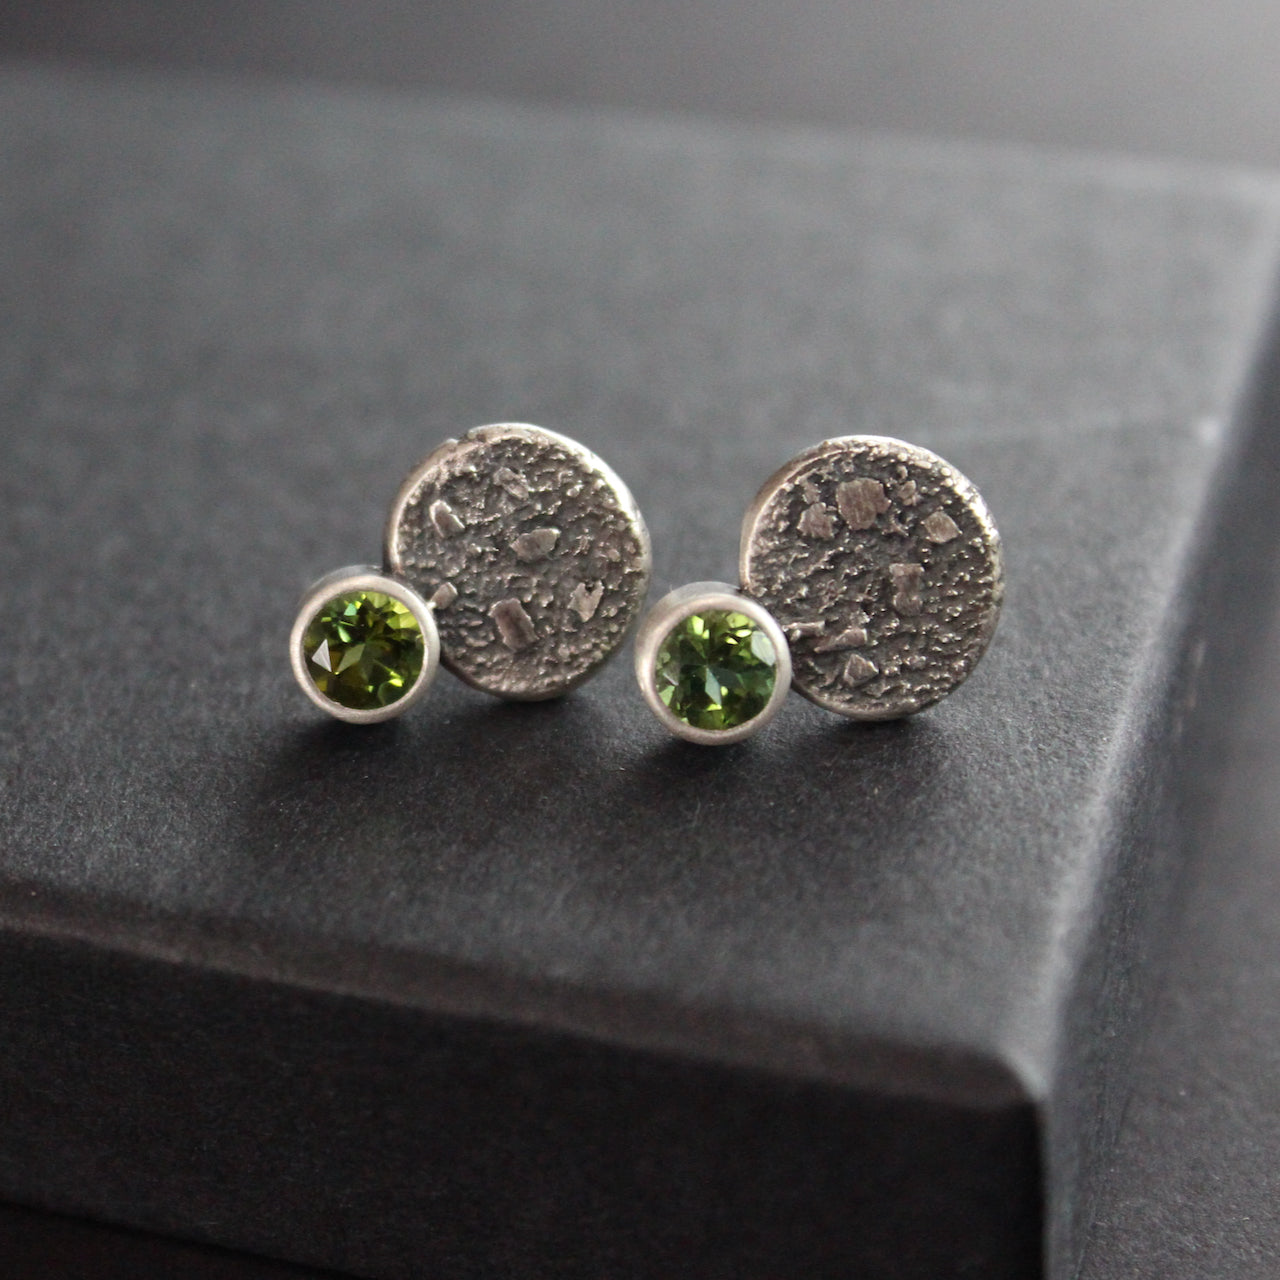 Carin Lindberg - Green tourmaline stud earrings in textured sterling silver displayed on raised box